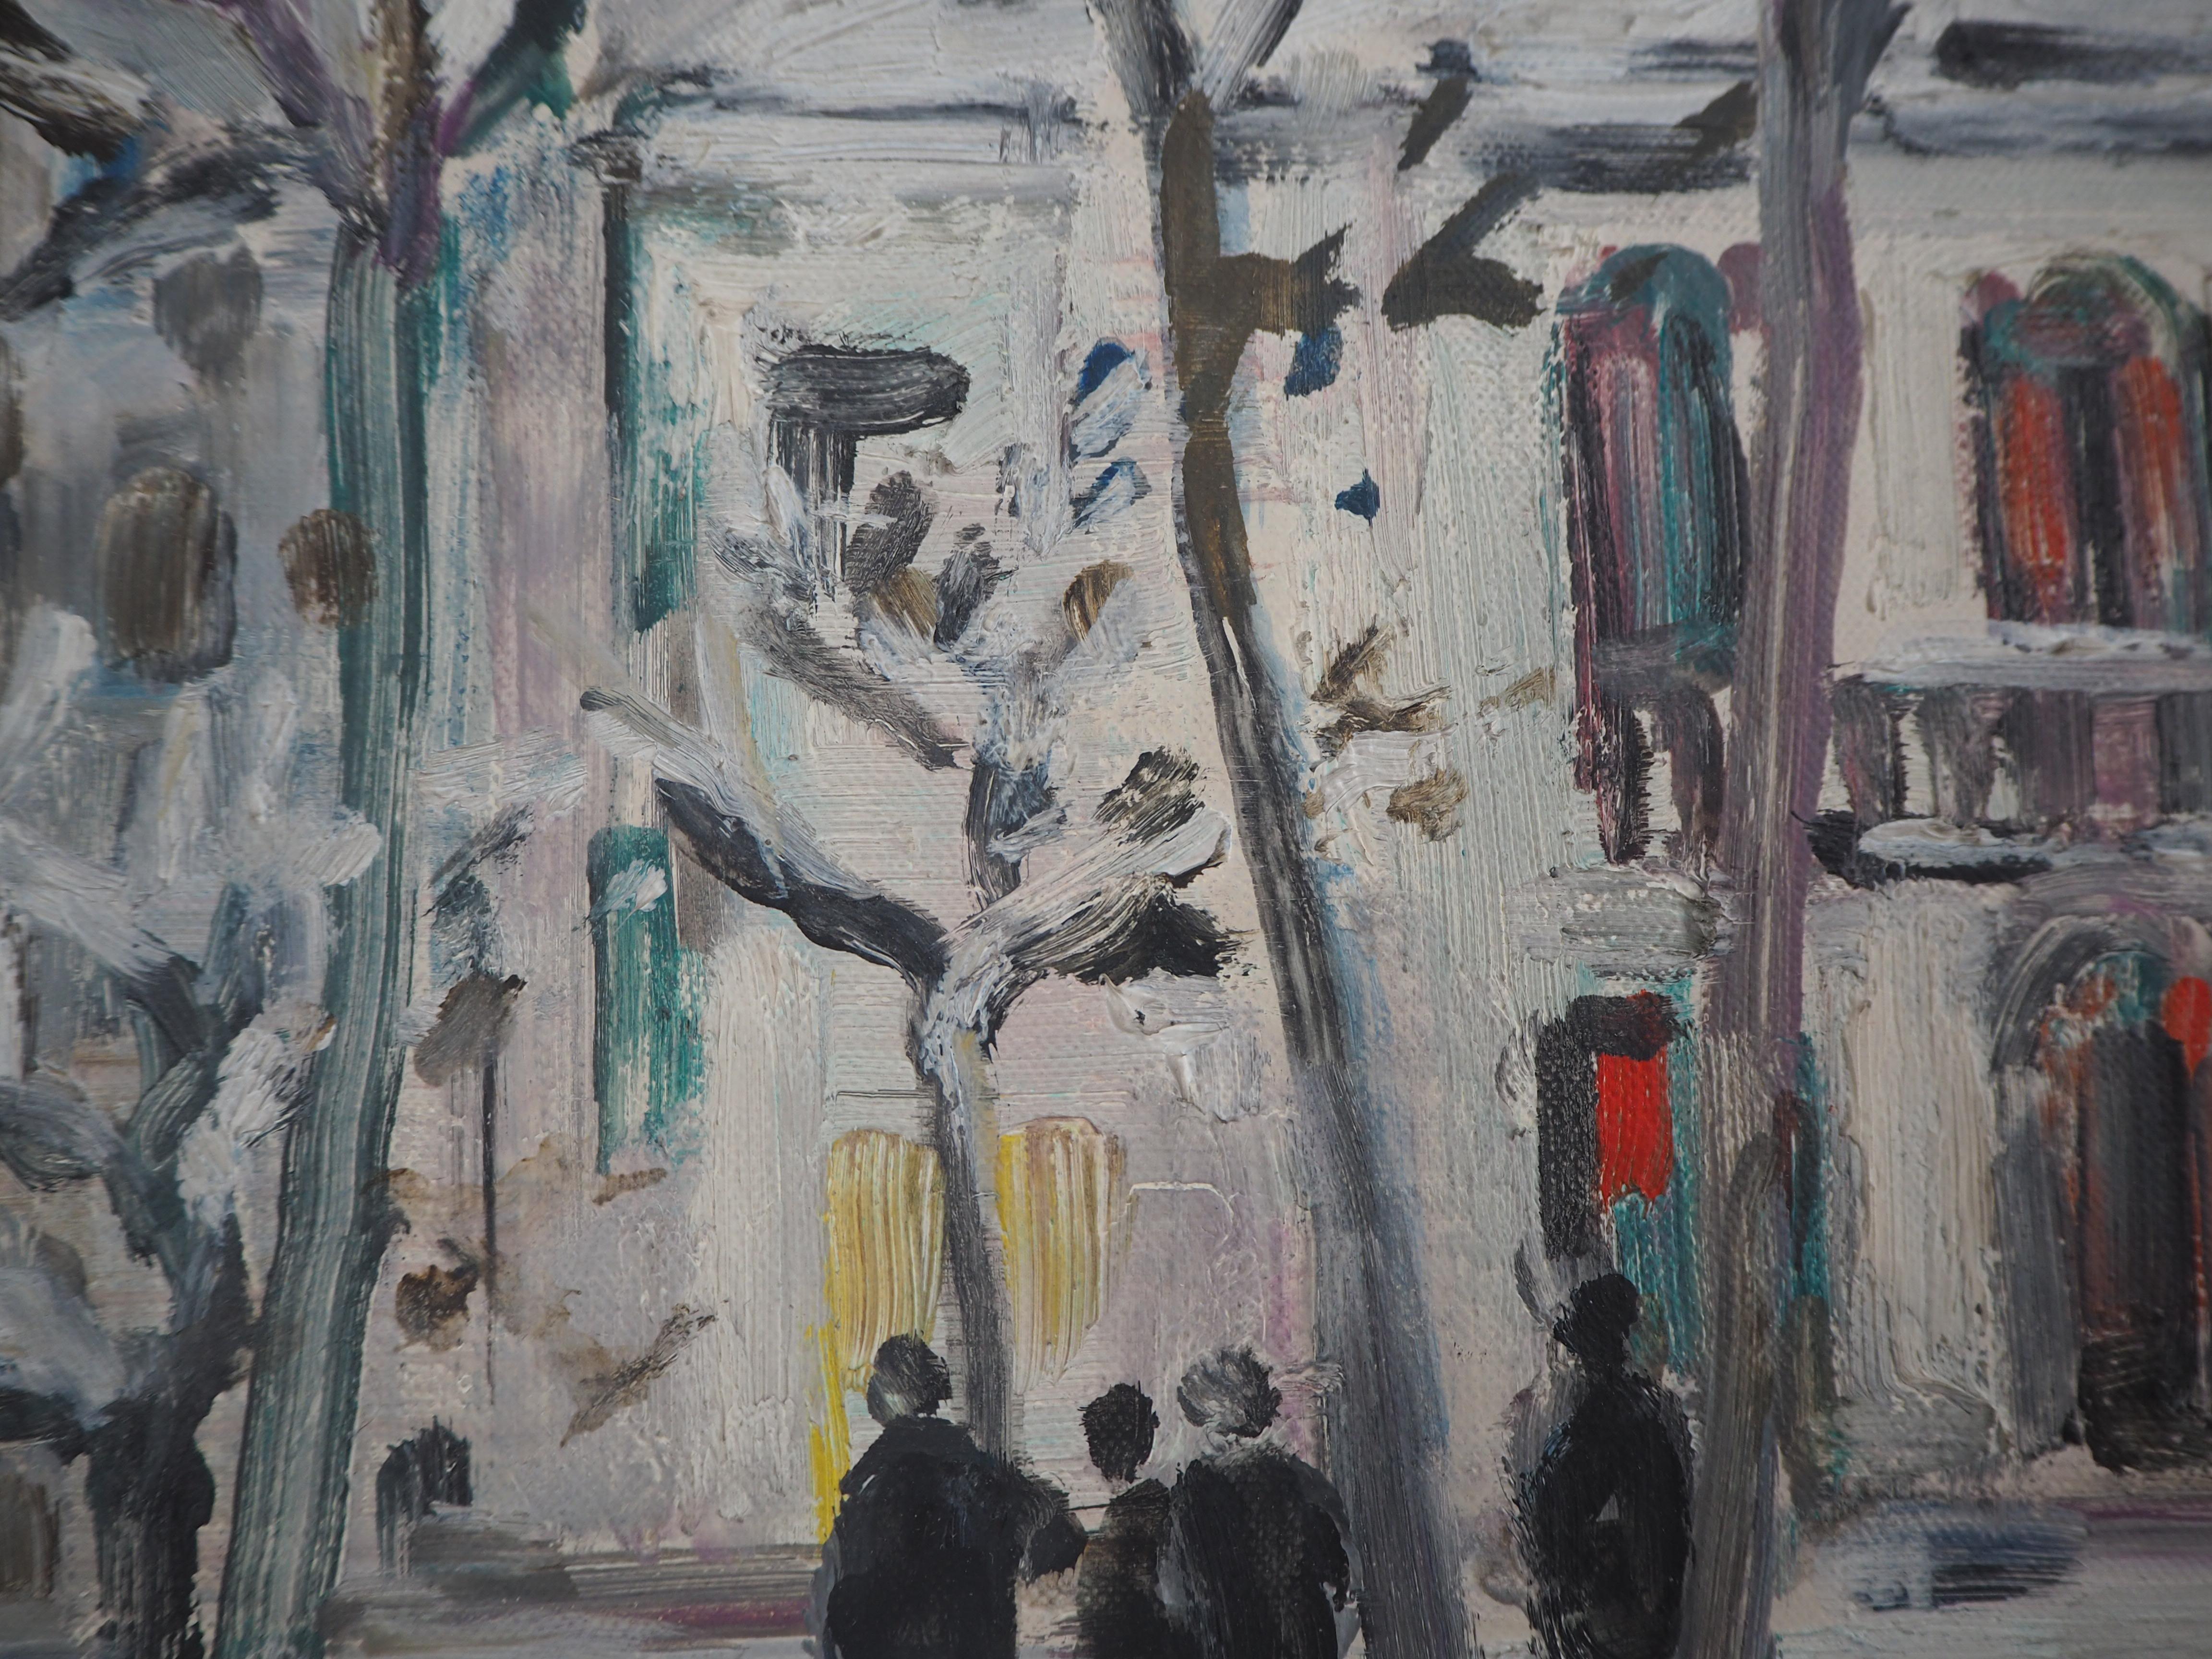 Paris : Snow on Atelier Theater in Montmartre - Original oil on canvas, signed 2